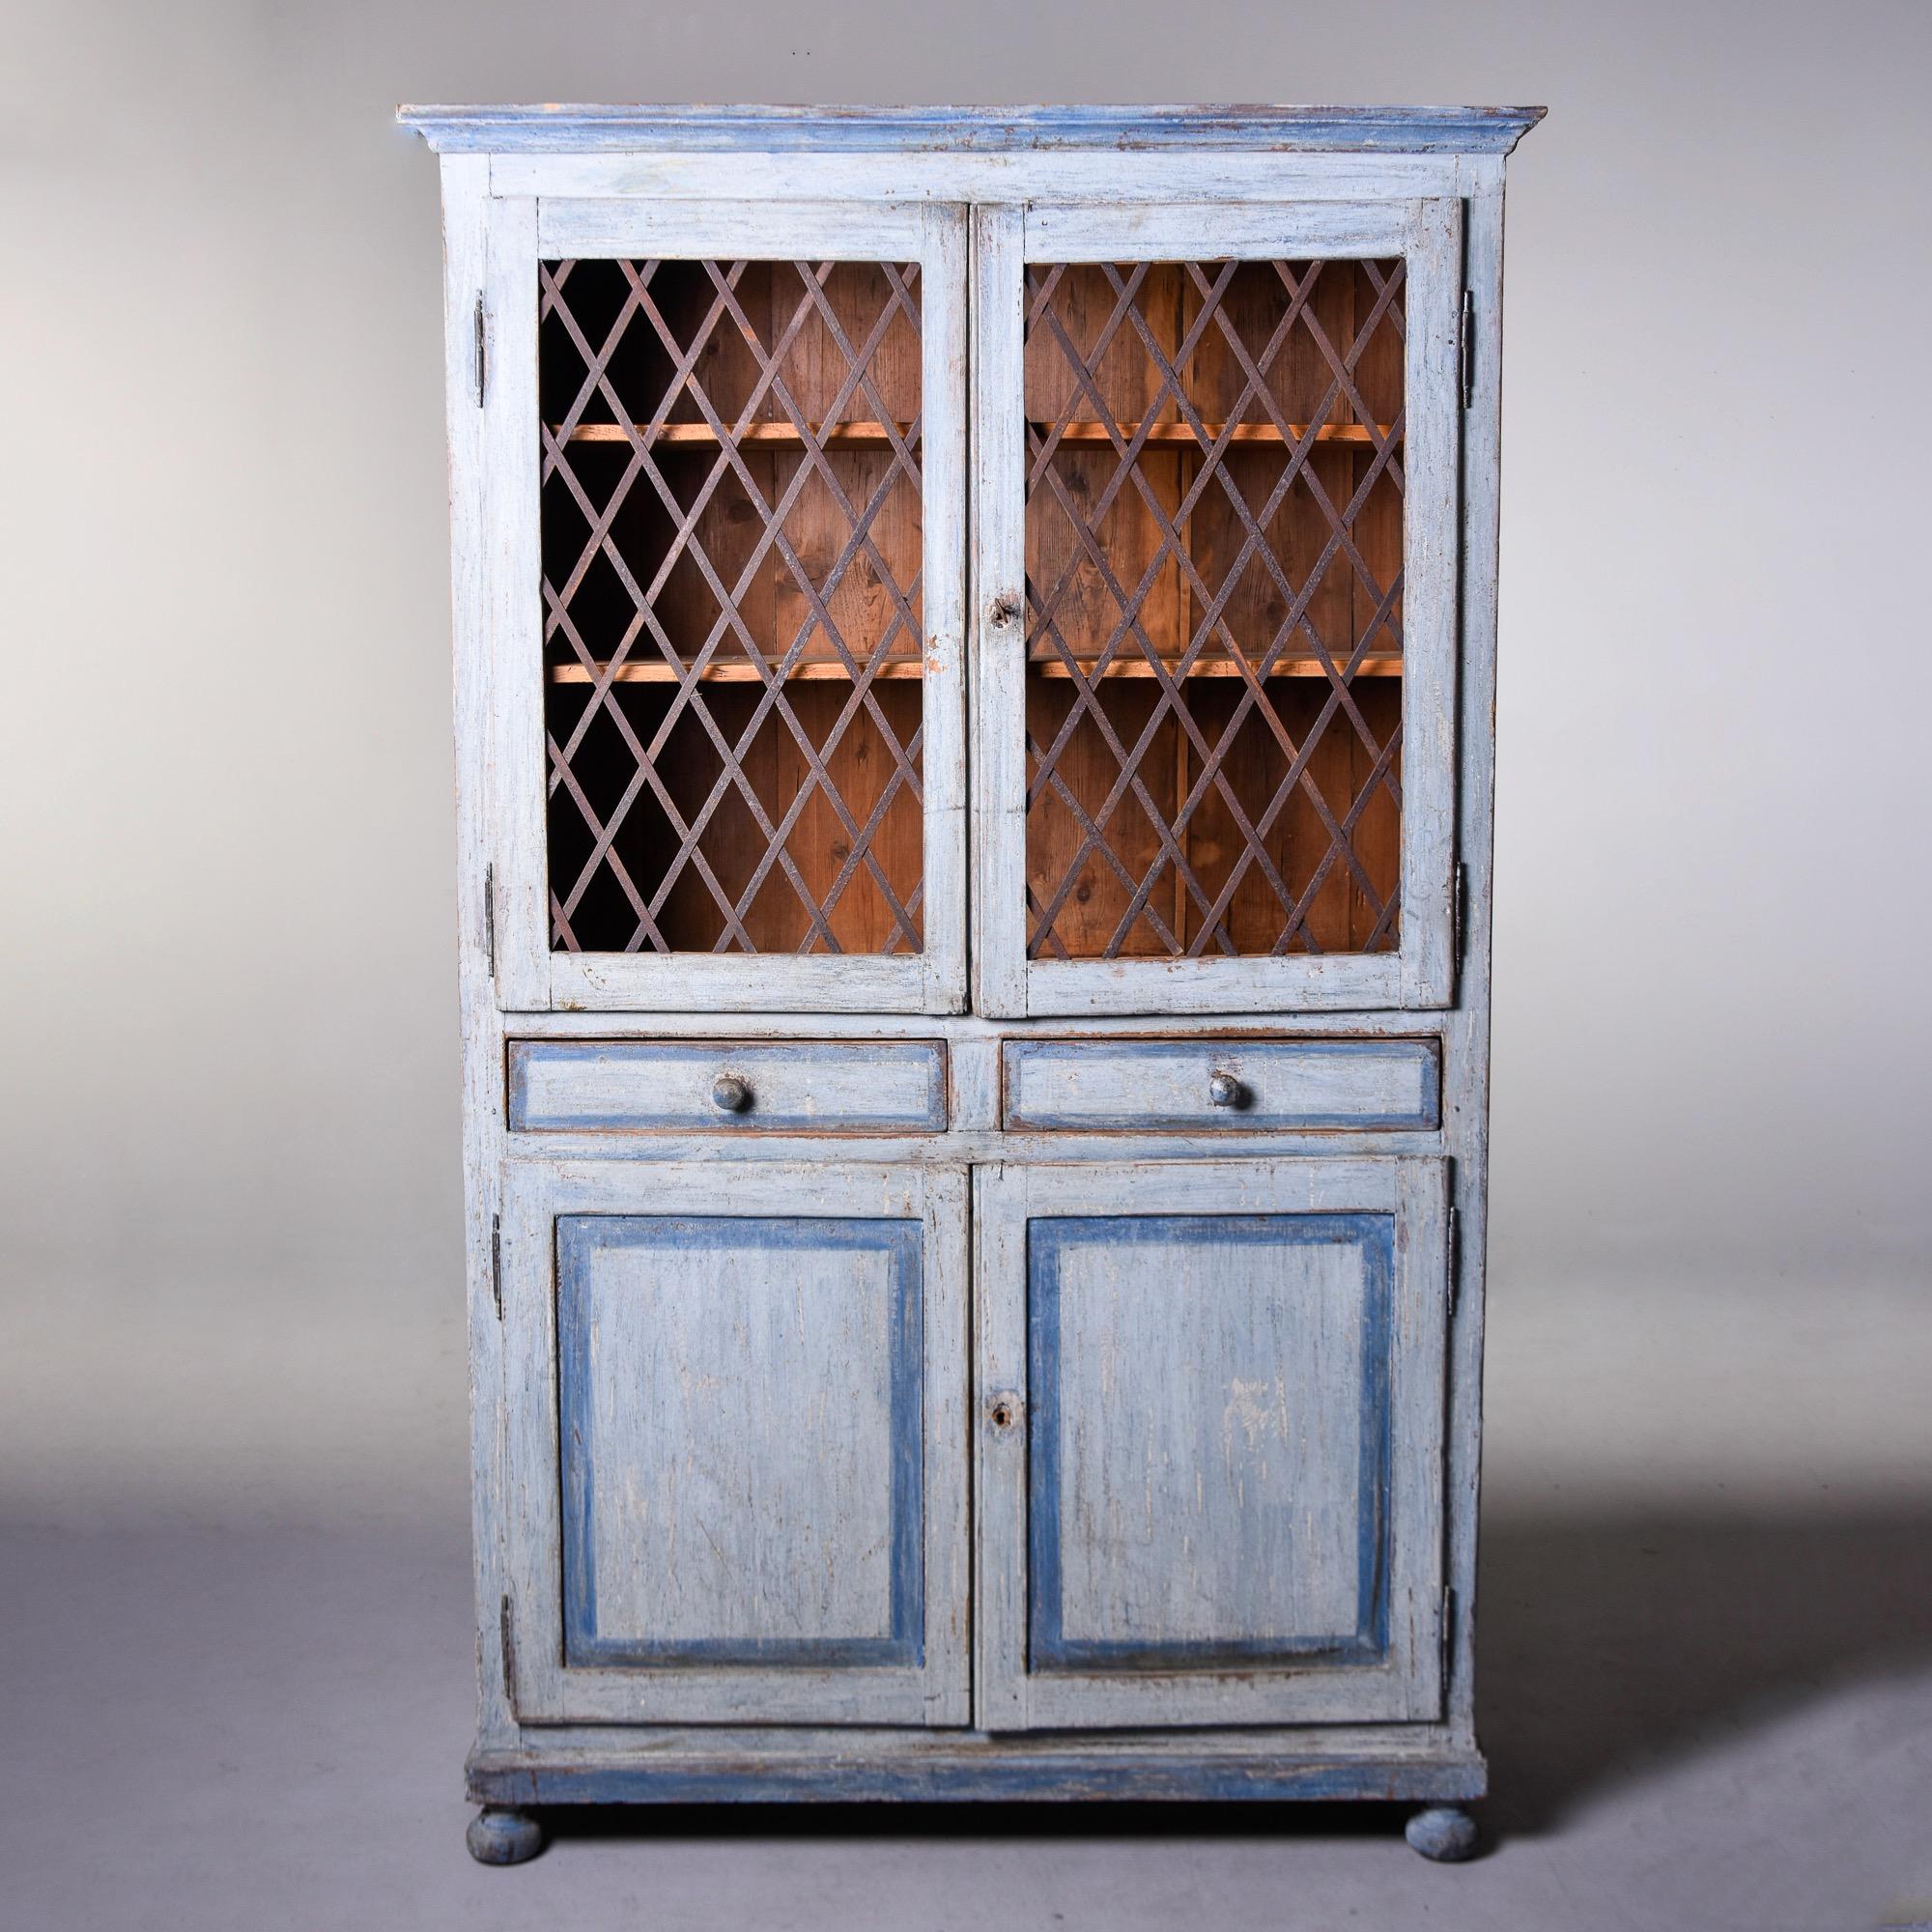 Found in Italy, this circa 1850s tall painted cabinet is from the Bologna region. Top section has a pediment top, functional lock with original key, unpainted interior and two adjustable internal shelves. Doors have weathered metal lattice fronts.